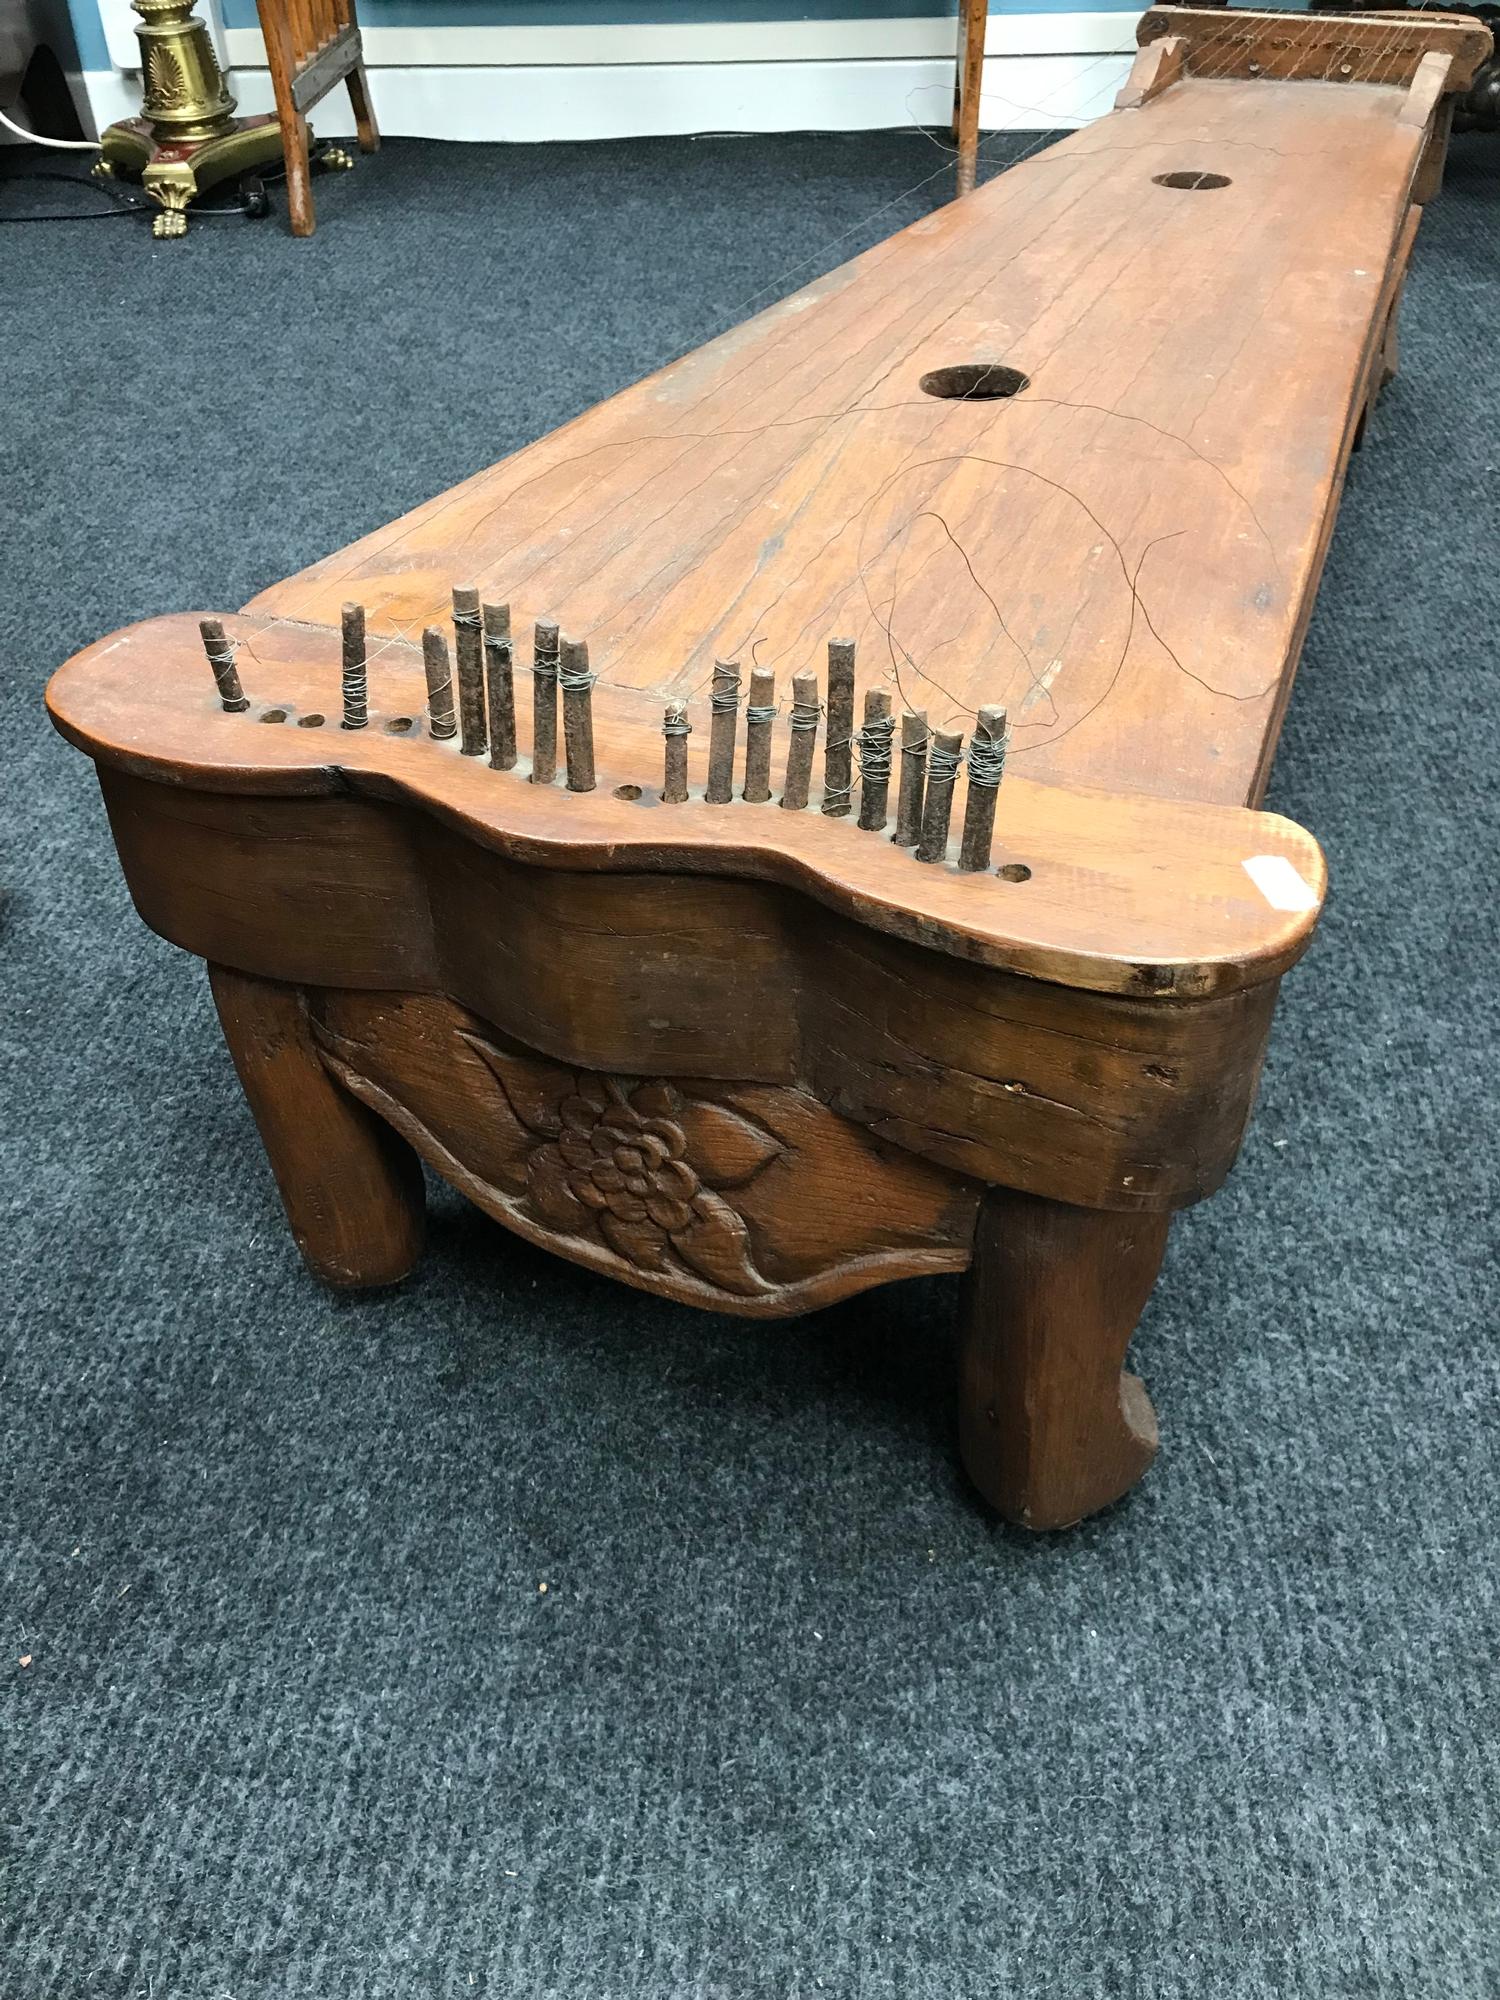 A Large 19th Century Malaysian hardwood Zither/ Guqin sit down instrument. Comes with wooden tone/ - Image 2 of 6